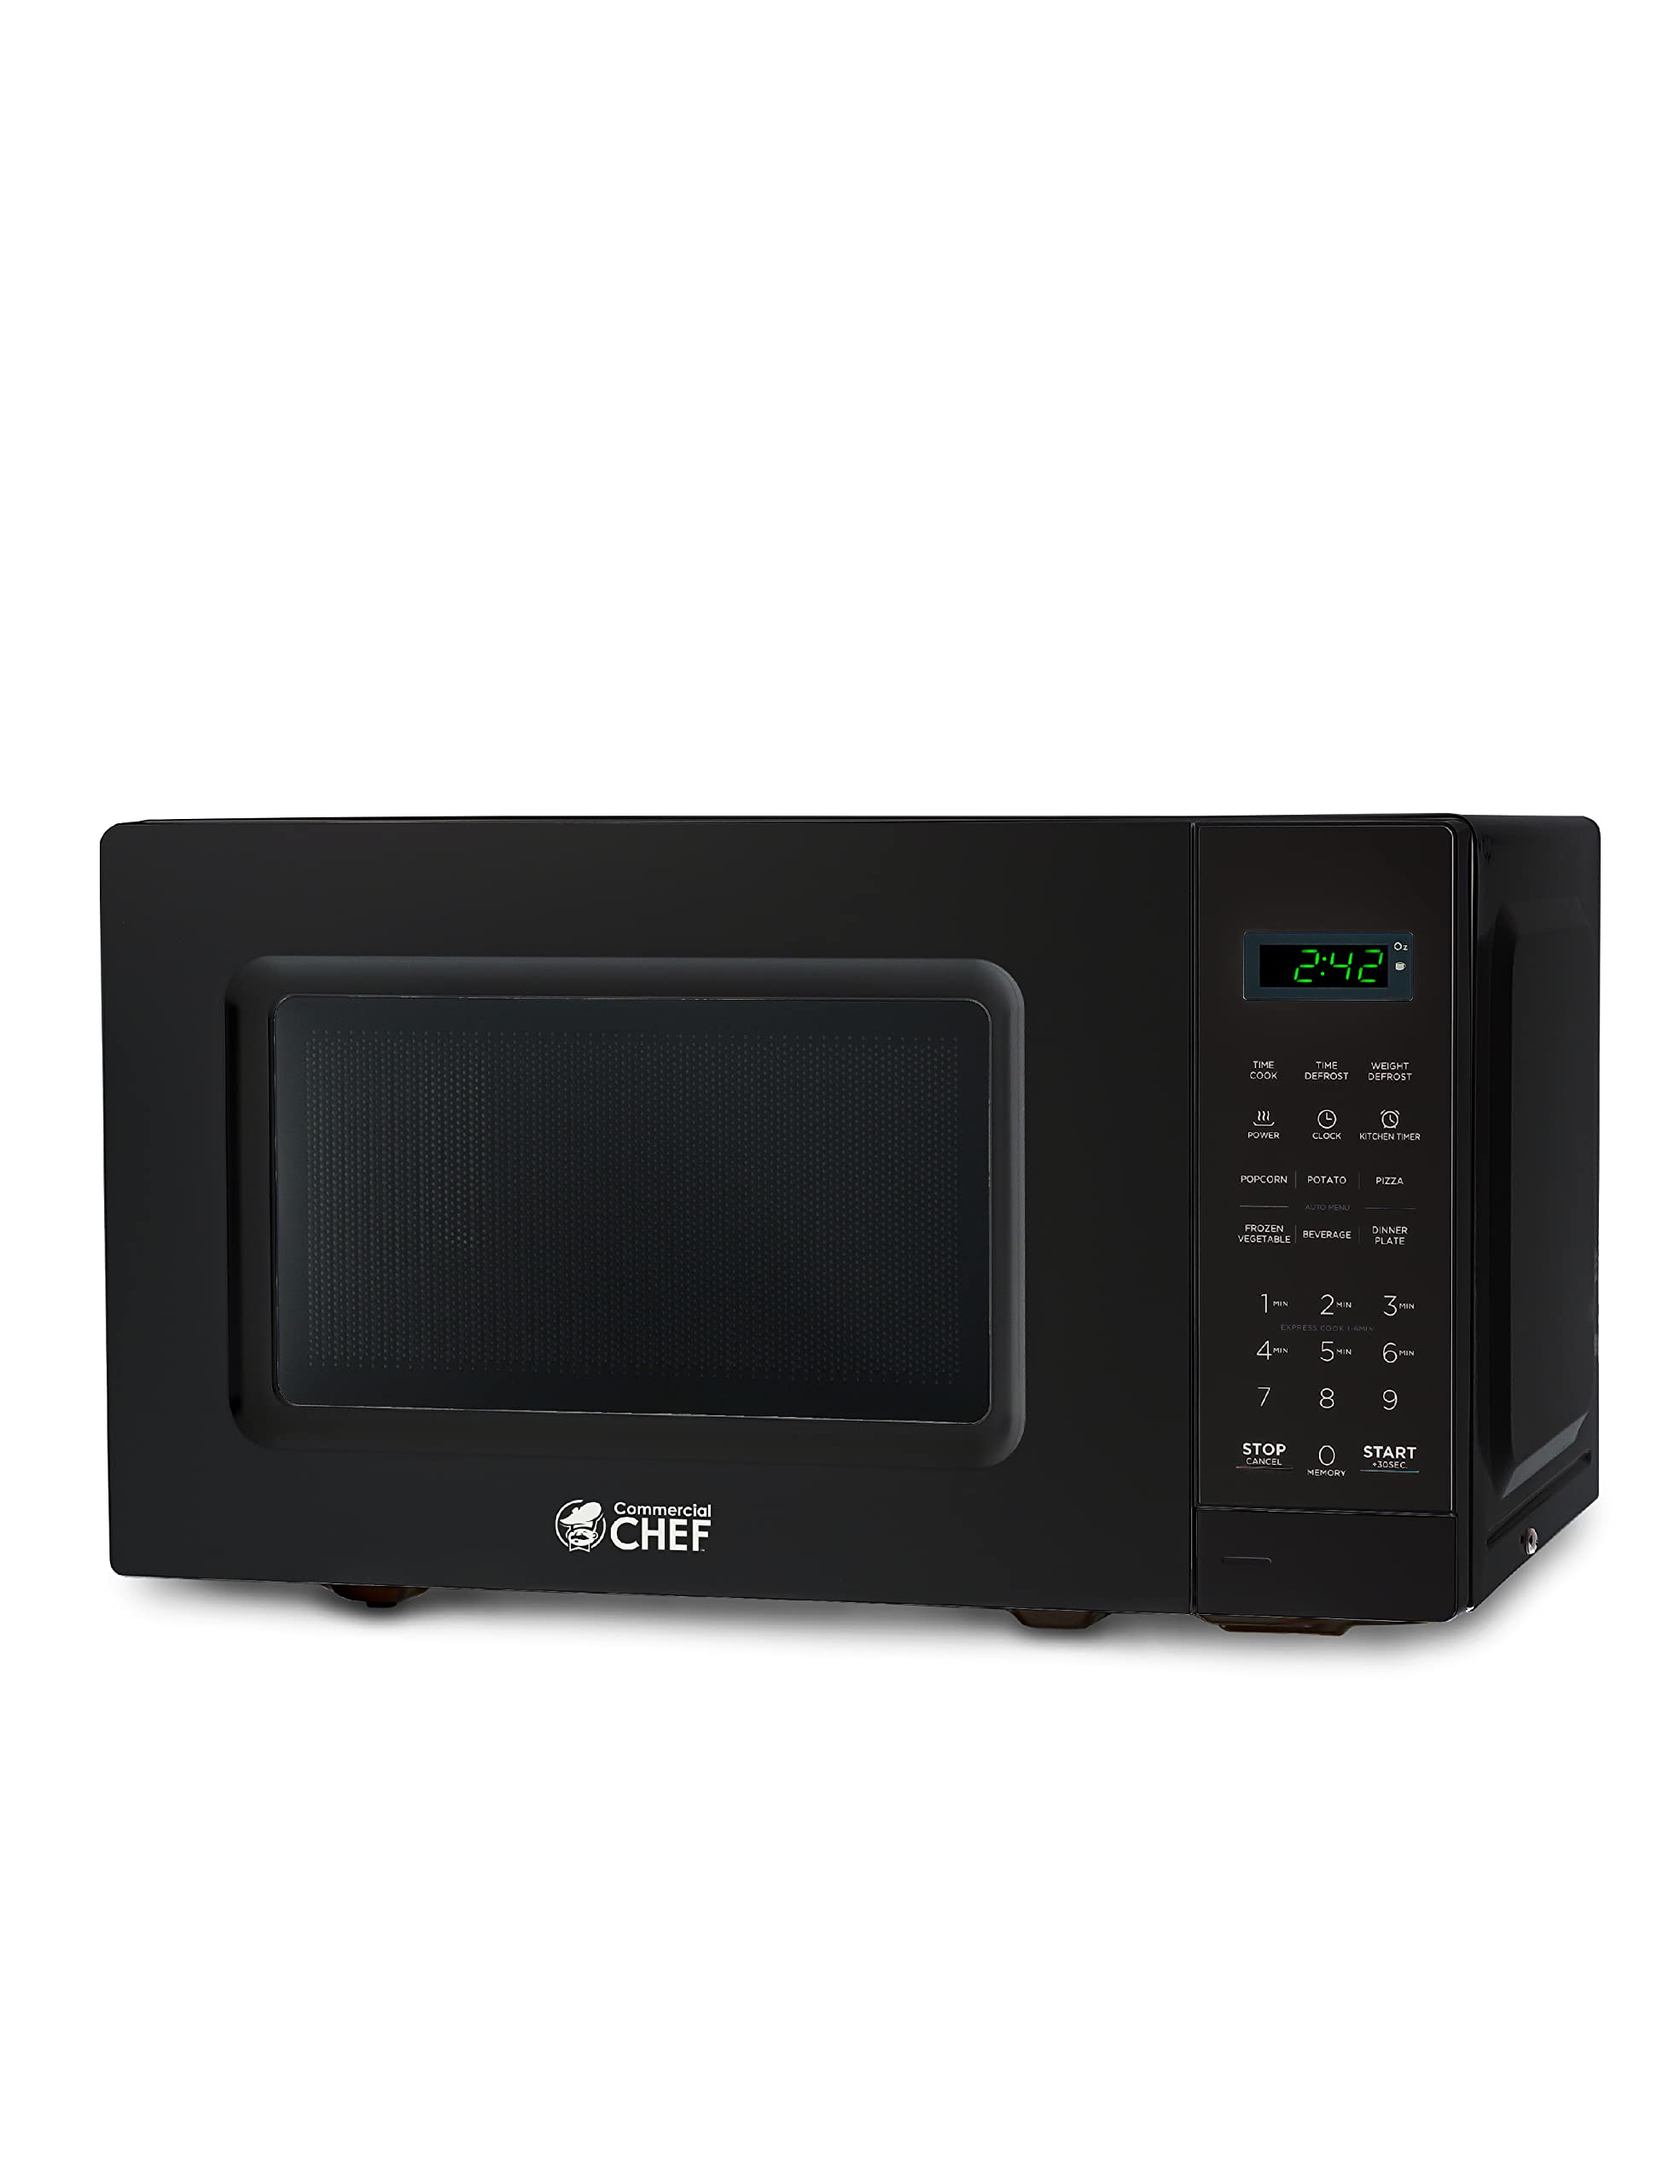 Commercial CHEF Countertop Microwave Oven, 0.6 Cu. Ft, Black